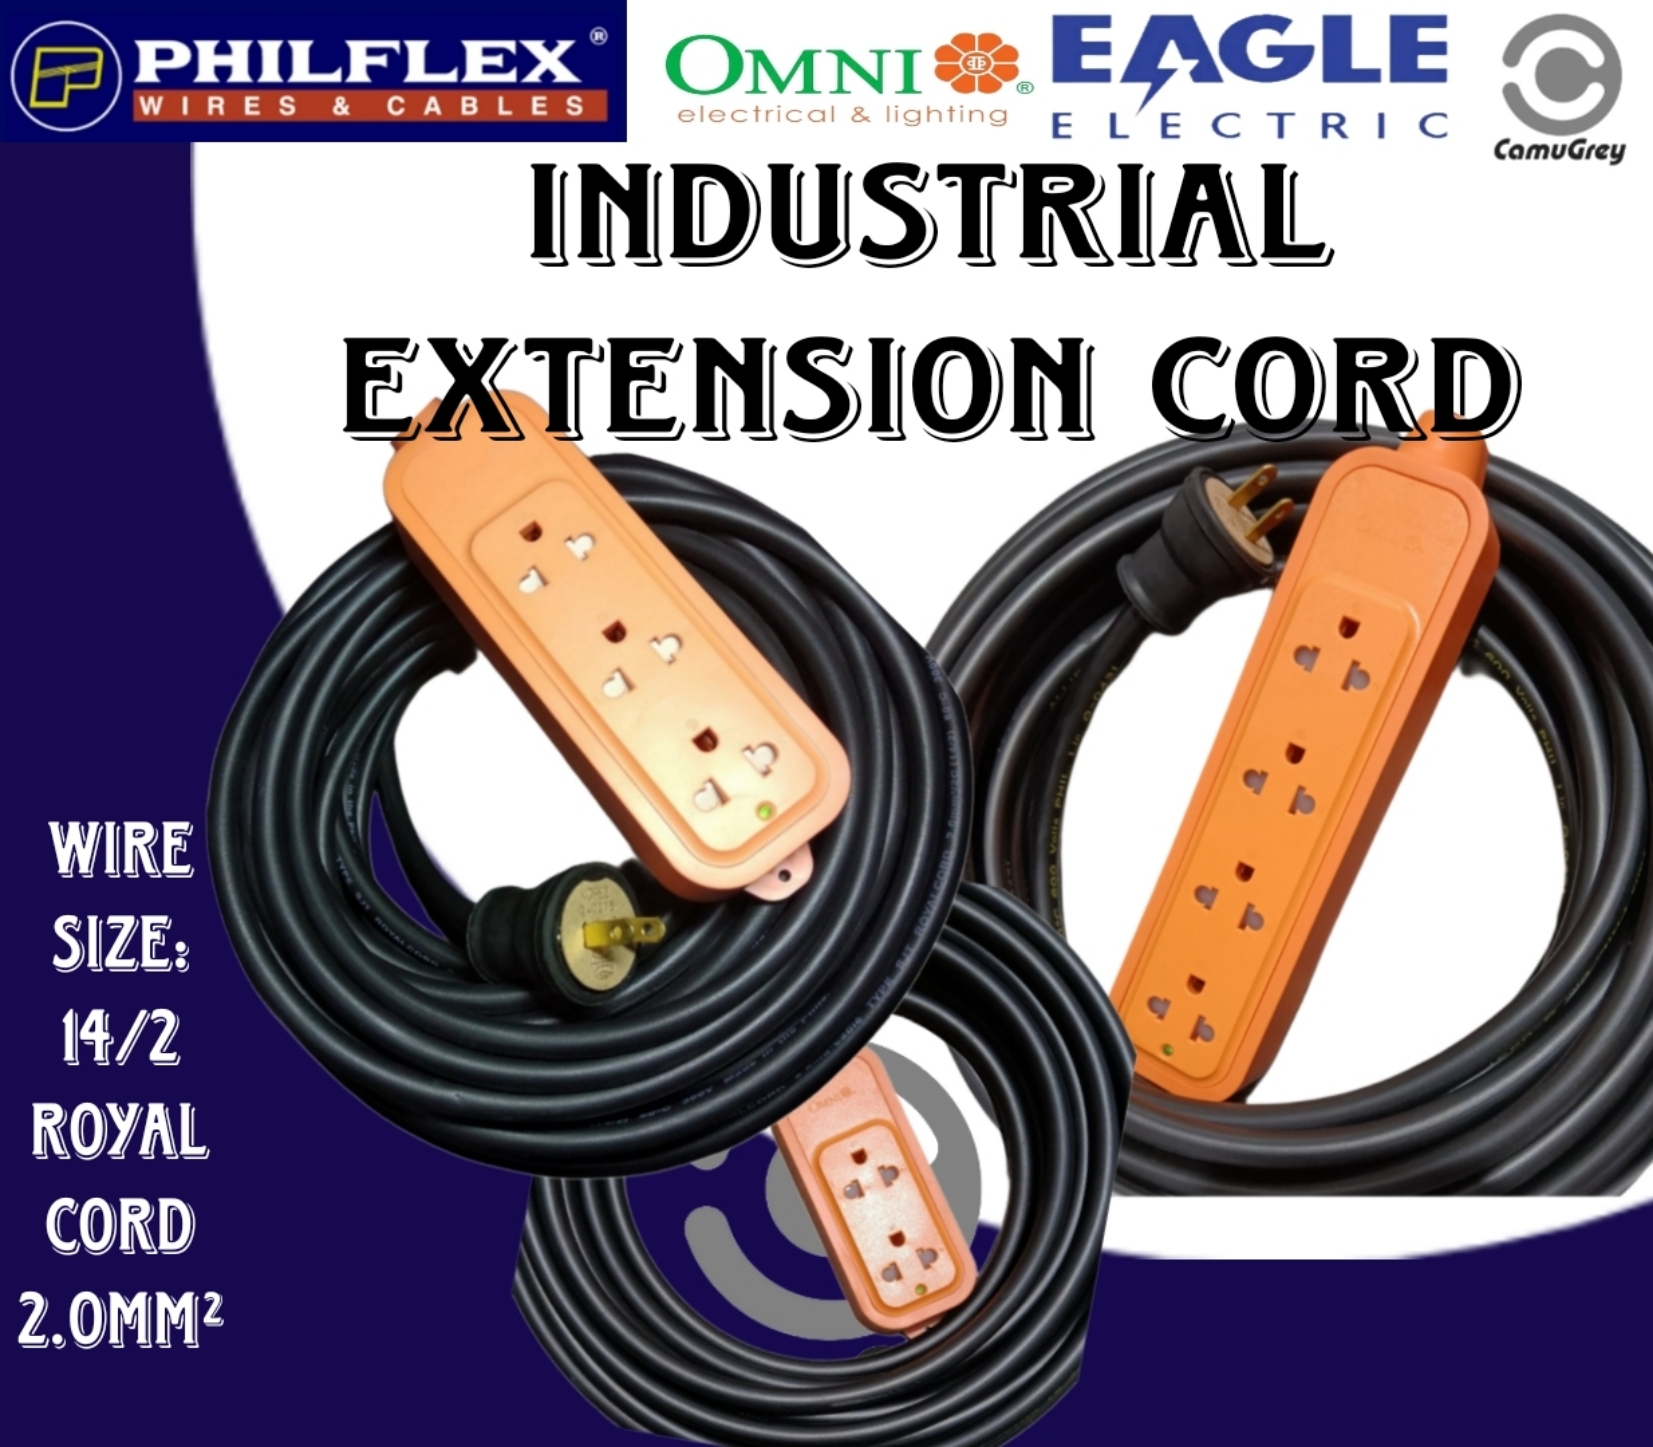 INDUSTRIAL EXTENSION CORD HEAVY DUTY 14/2 ROYAL CORD 1 TO 12 METERS